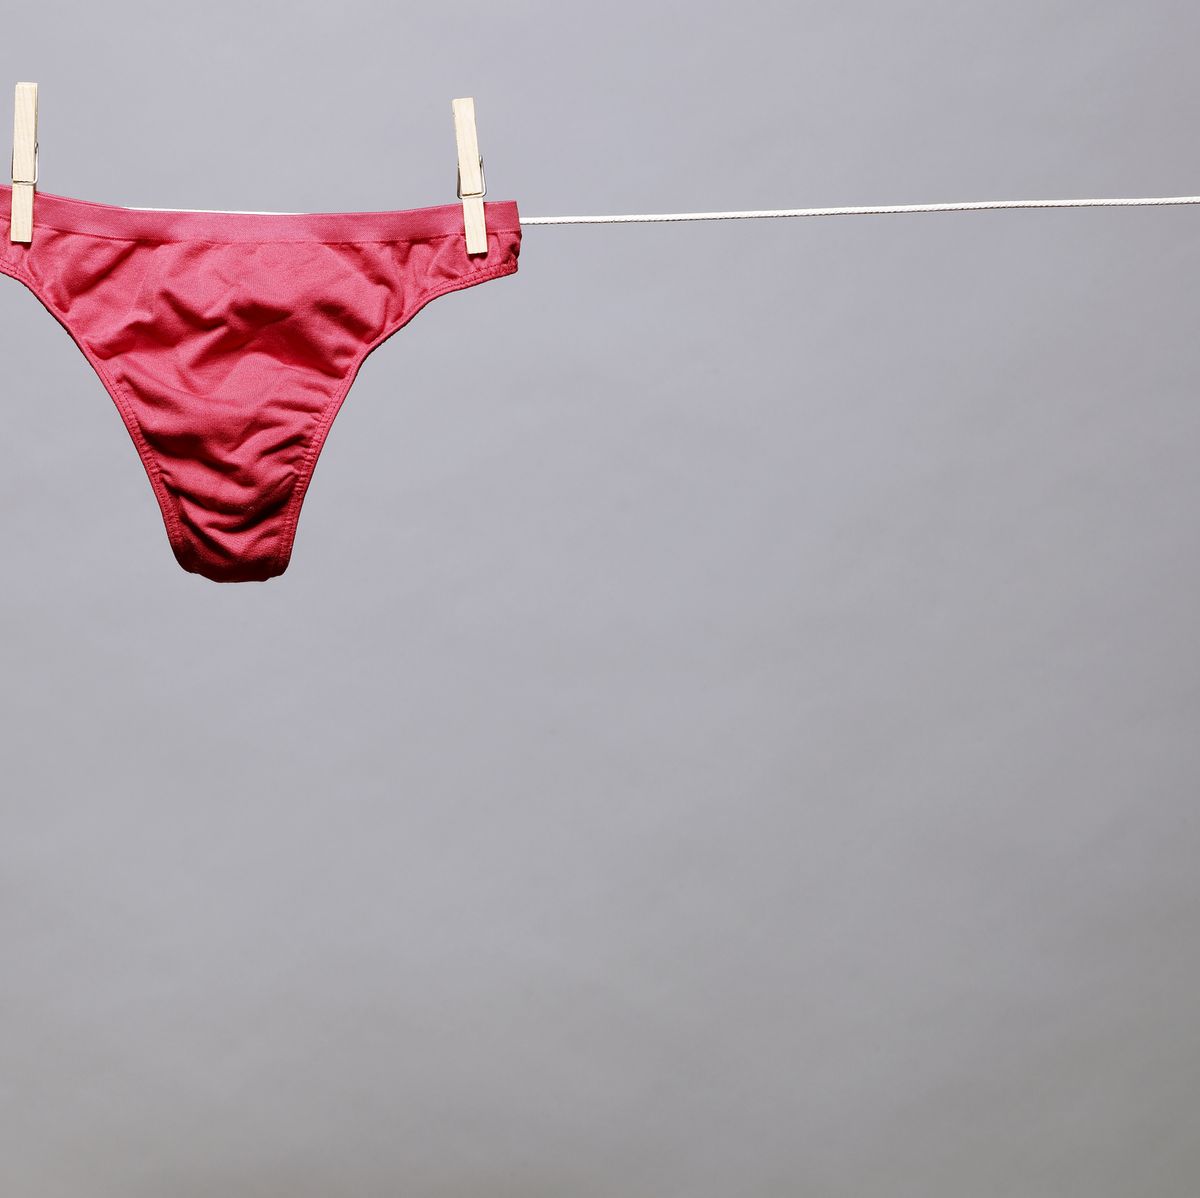 Preventing Infection - Your Panty Choice Makes a Difference, Pelvic Floor  Article